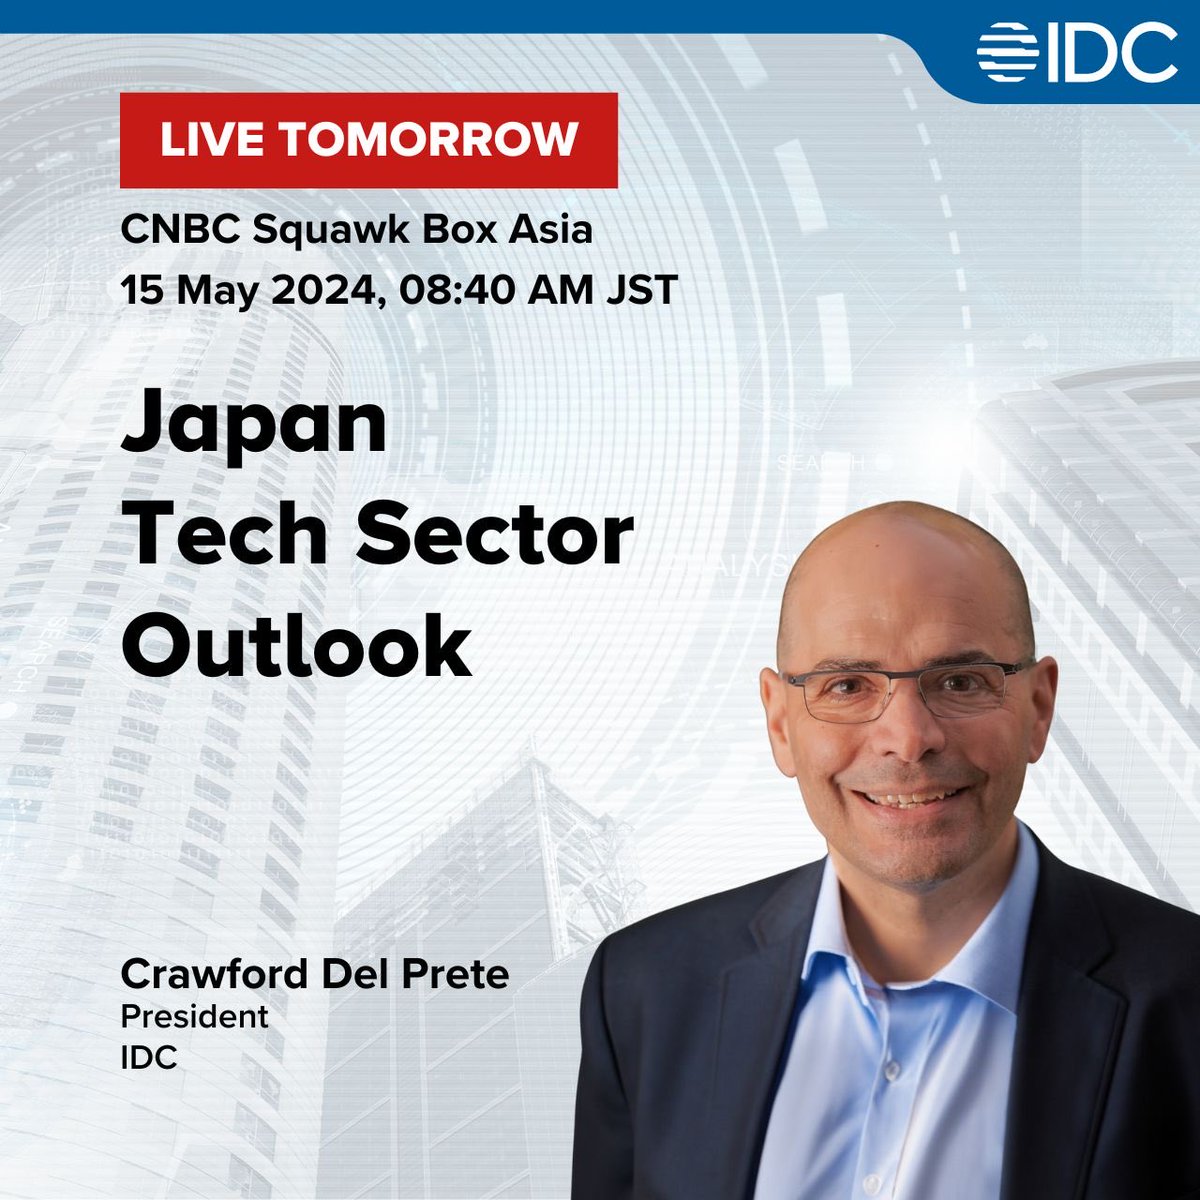 I look forward to joining the ⁦@CNBC⁩ squawk box Asia team to discuss IT trends in Japan on May 15. See you there!